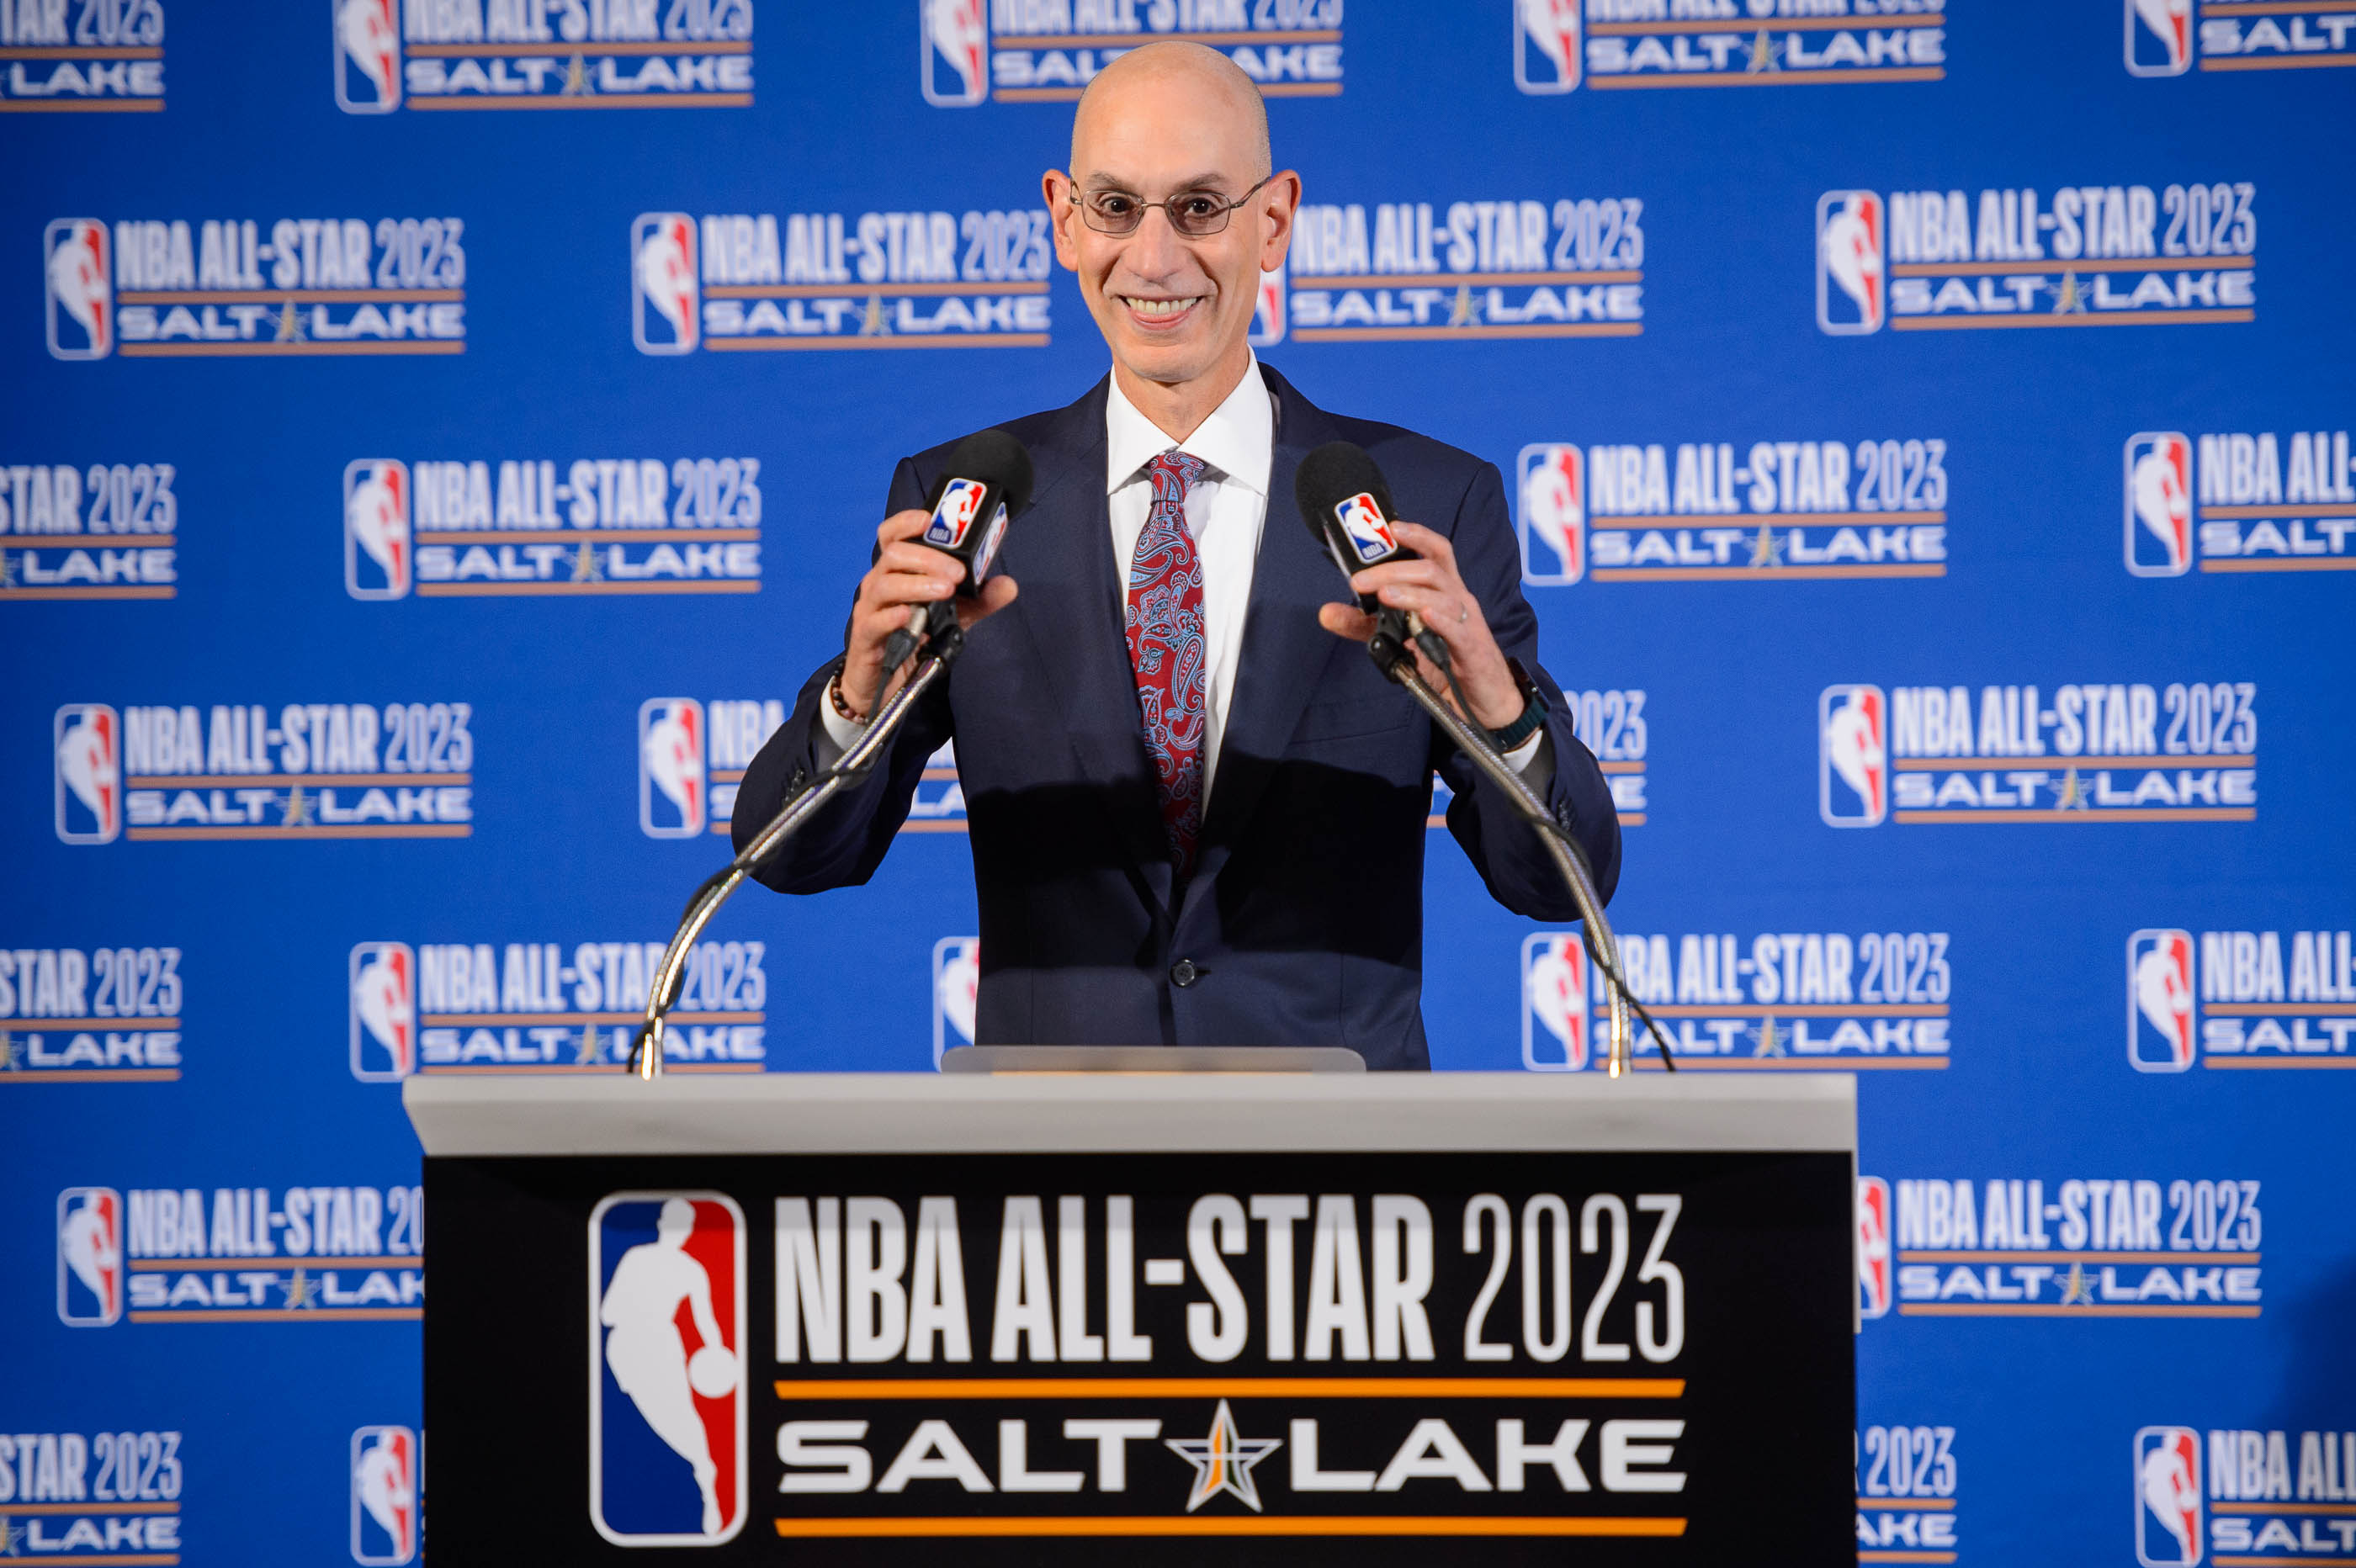 What will NBA All-Star Weekend look like in Salt Lake City next year? And  what impact will the 2023 game have on our community?